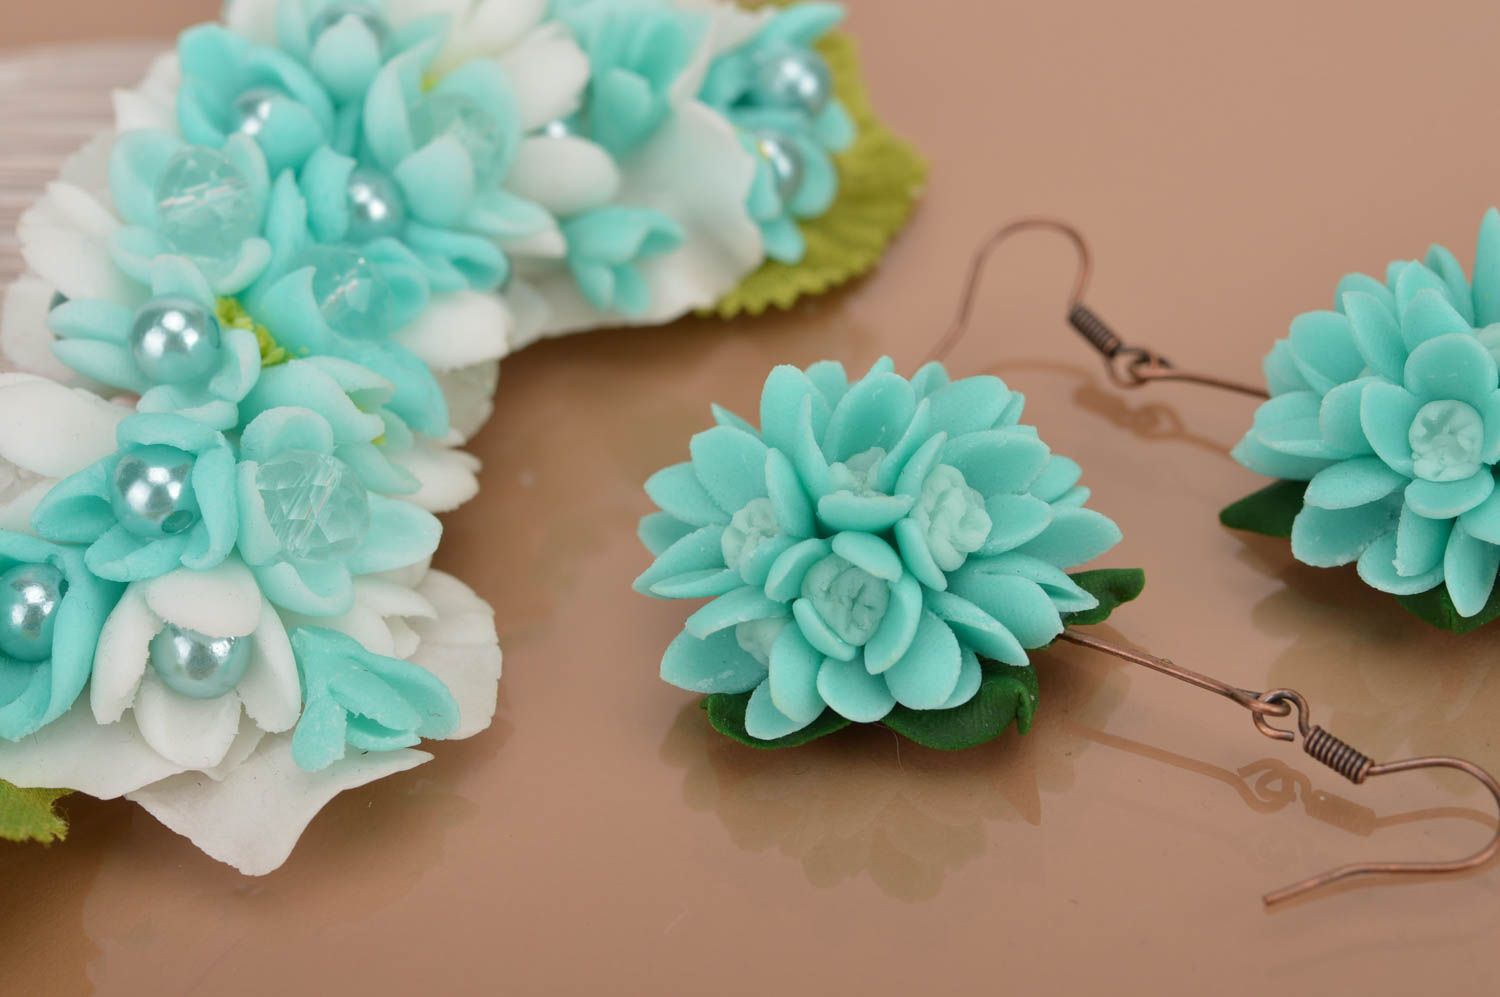 Set of handmade polymer clay floral accessories 2 items earrings and hair comb photo 4